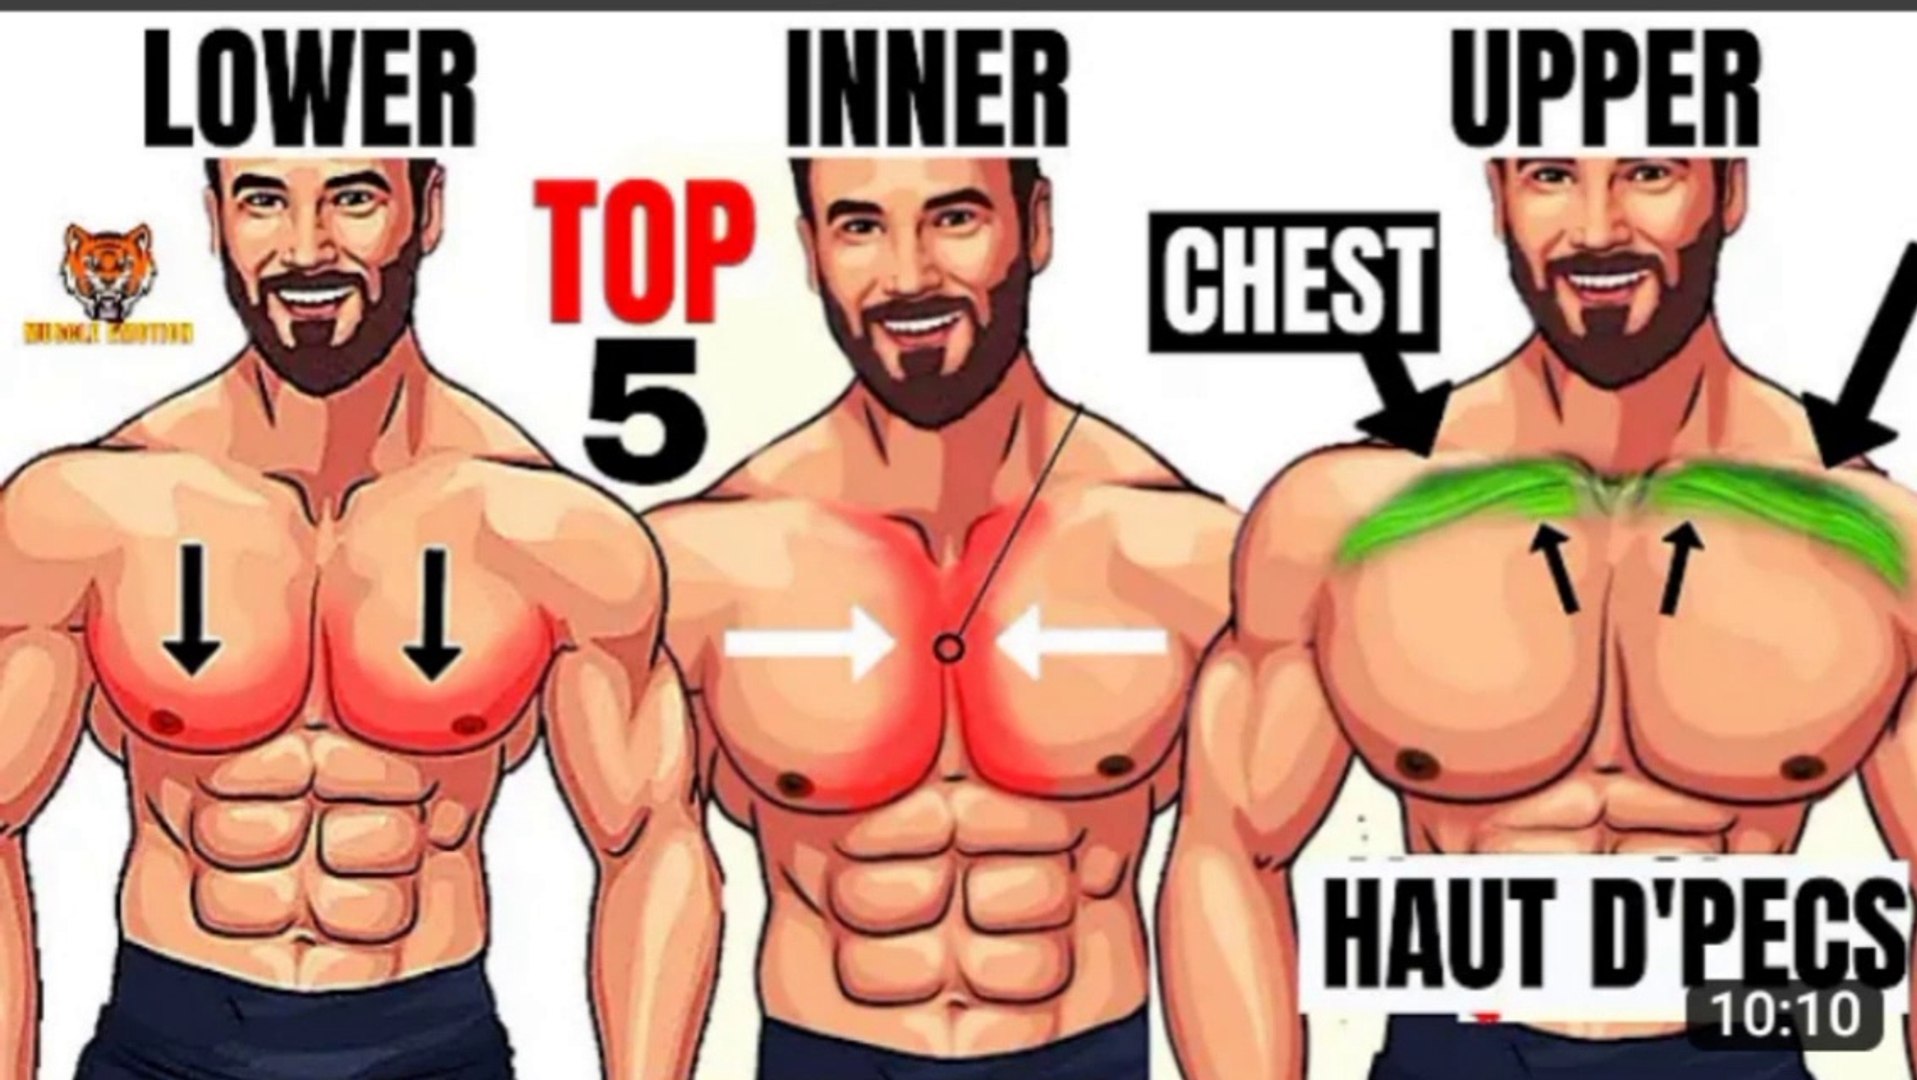 top 5 inner, lower and upper chest workout at gym - video Dailymotion